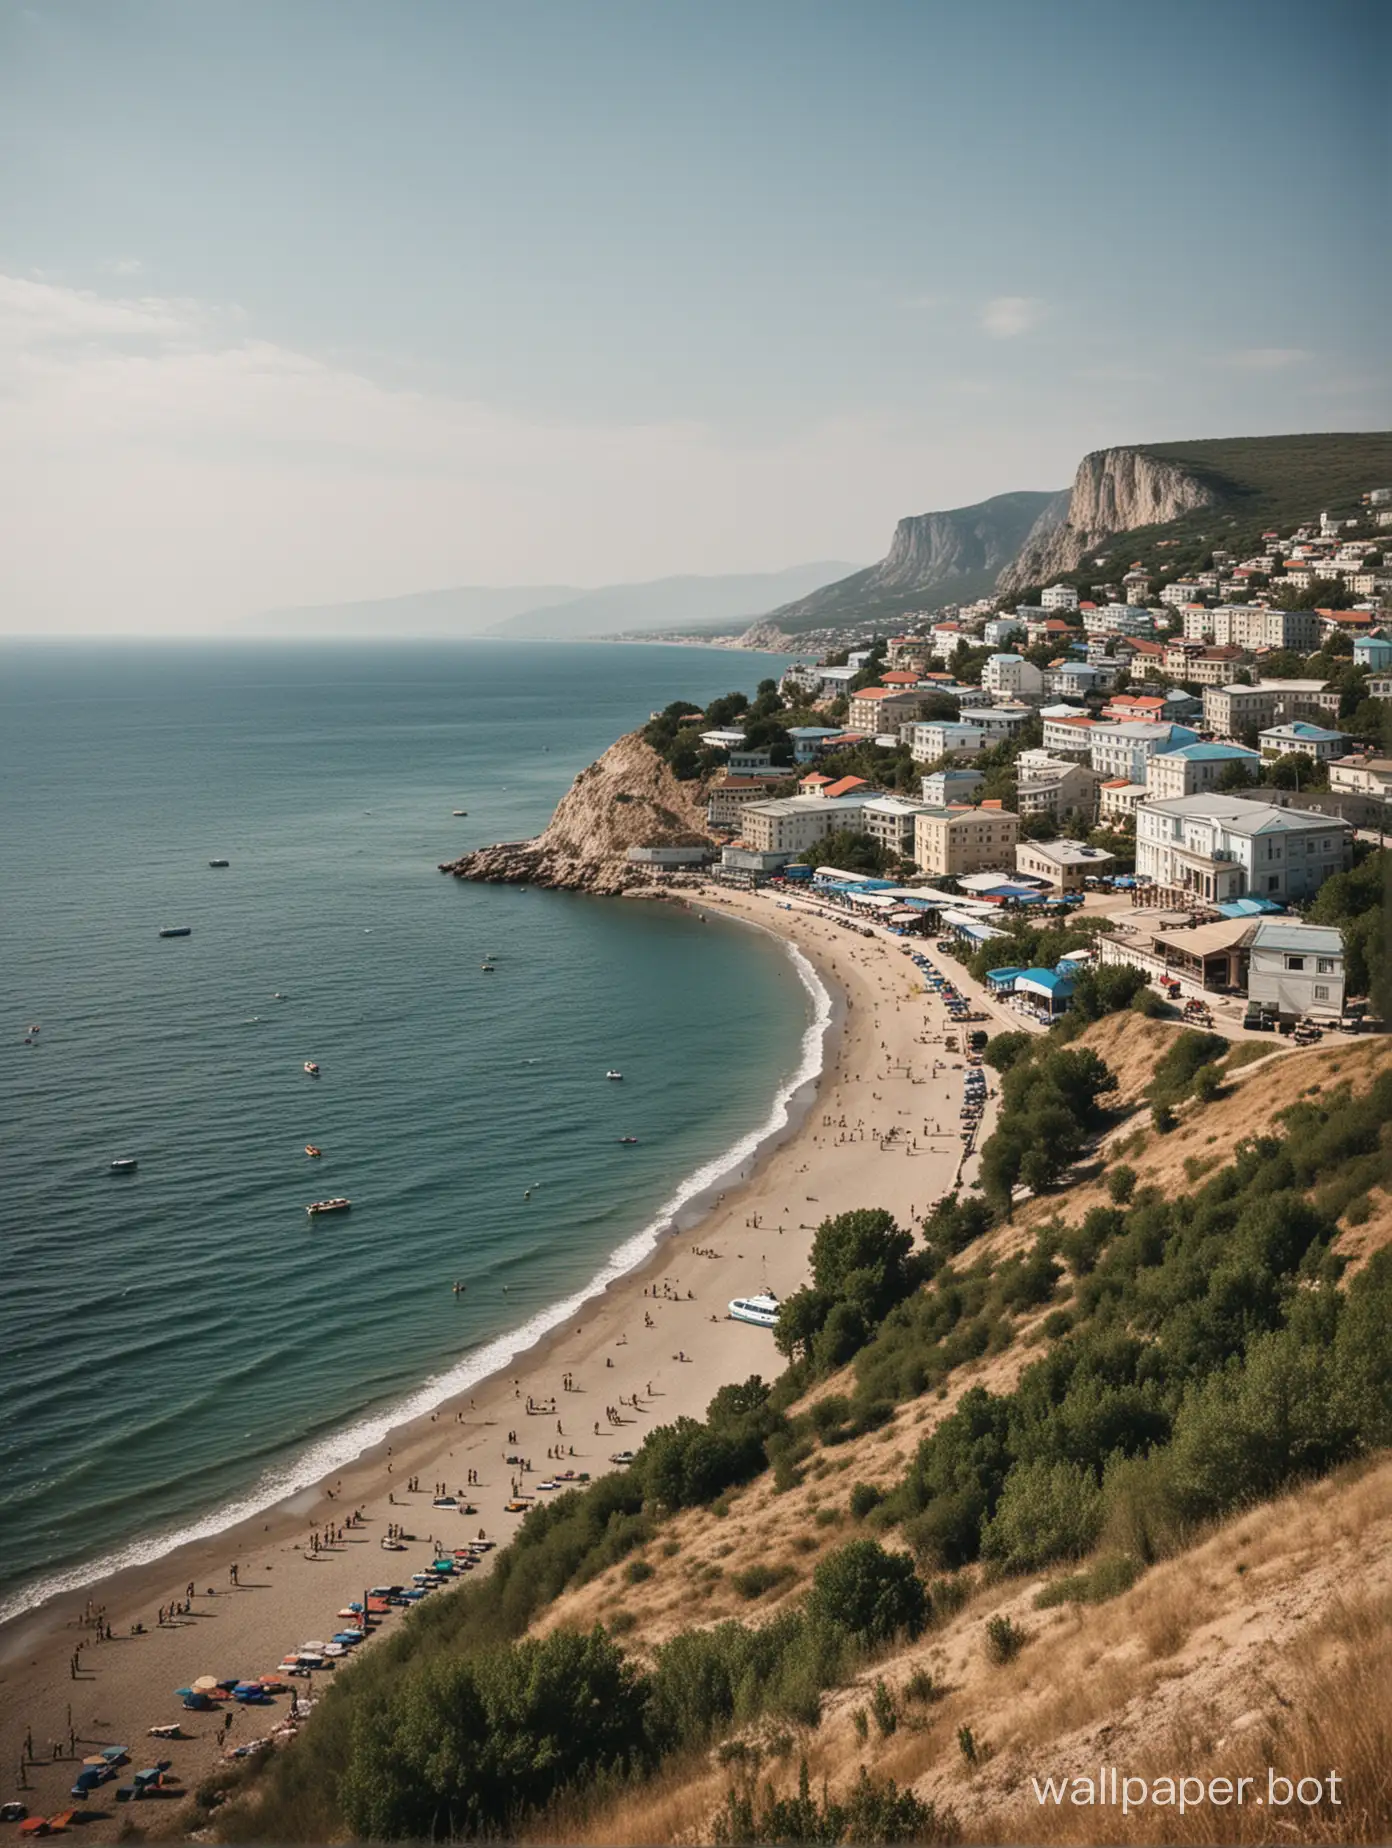 Crimea, view of a small town, sea, partially naked people